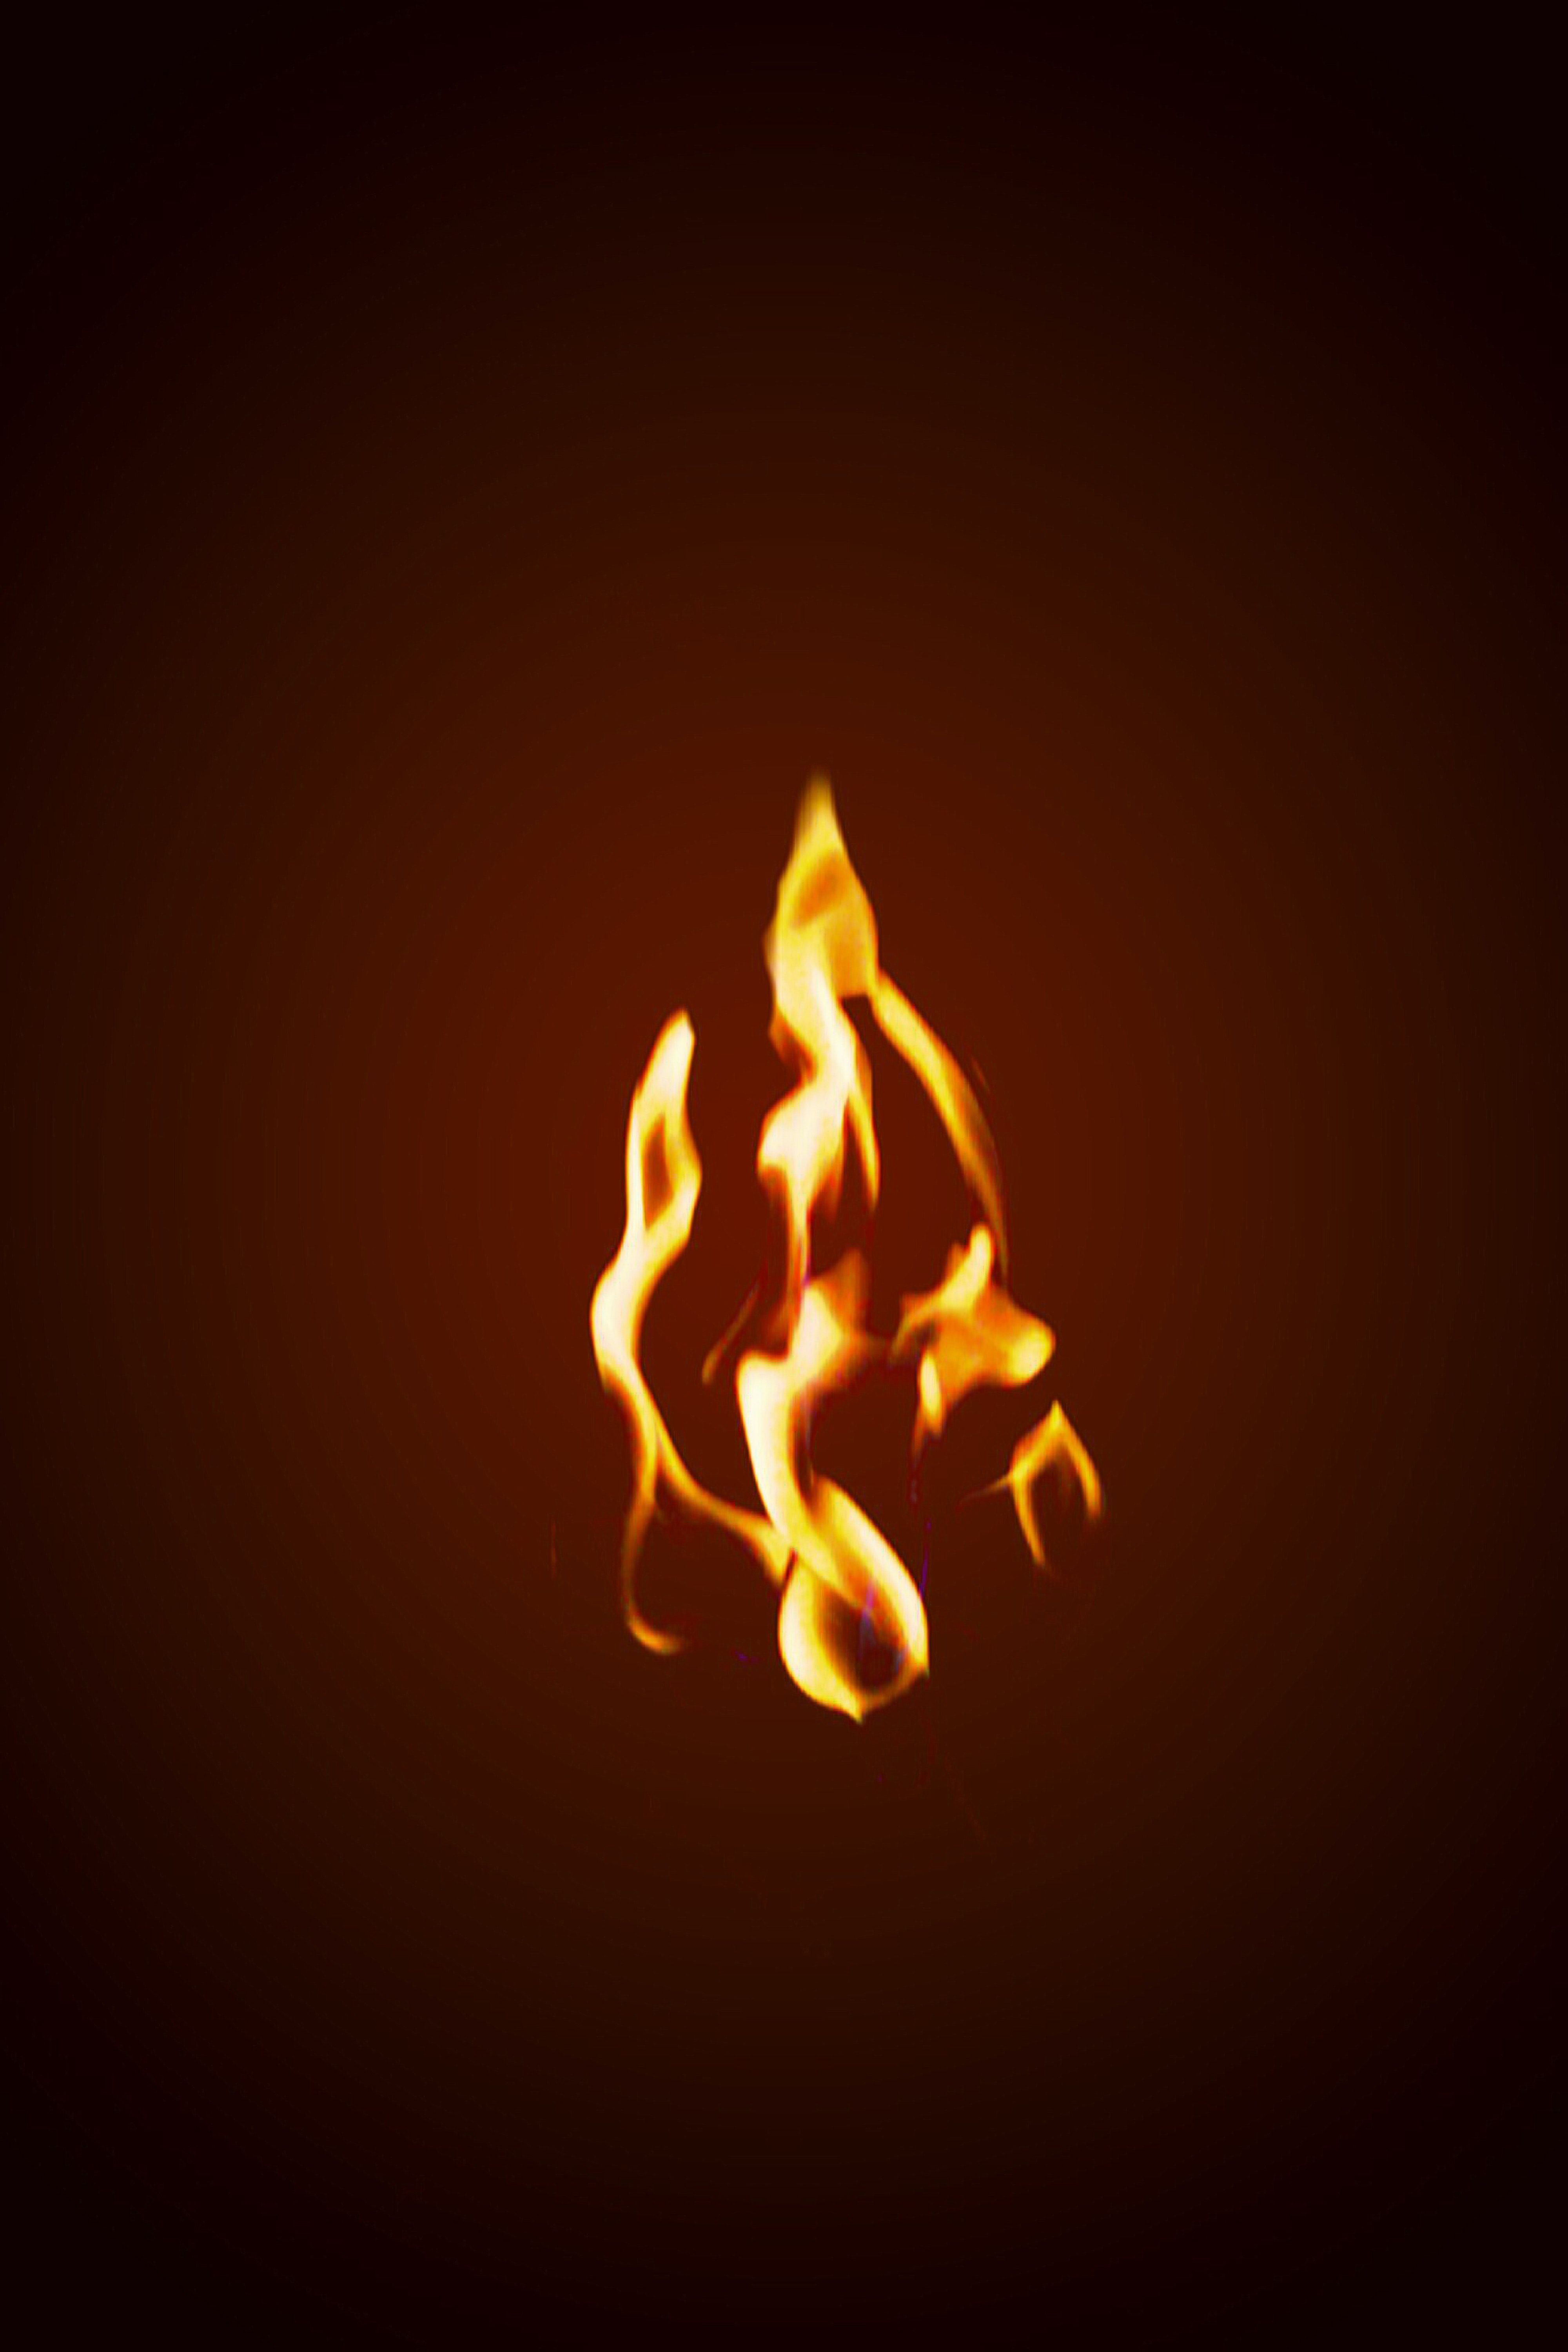 A fire is burning on the dark background - Flames